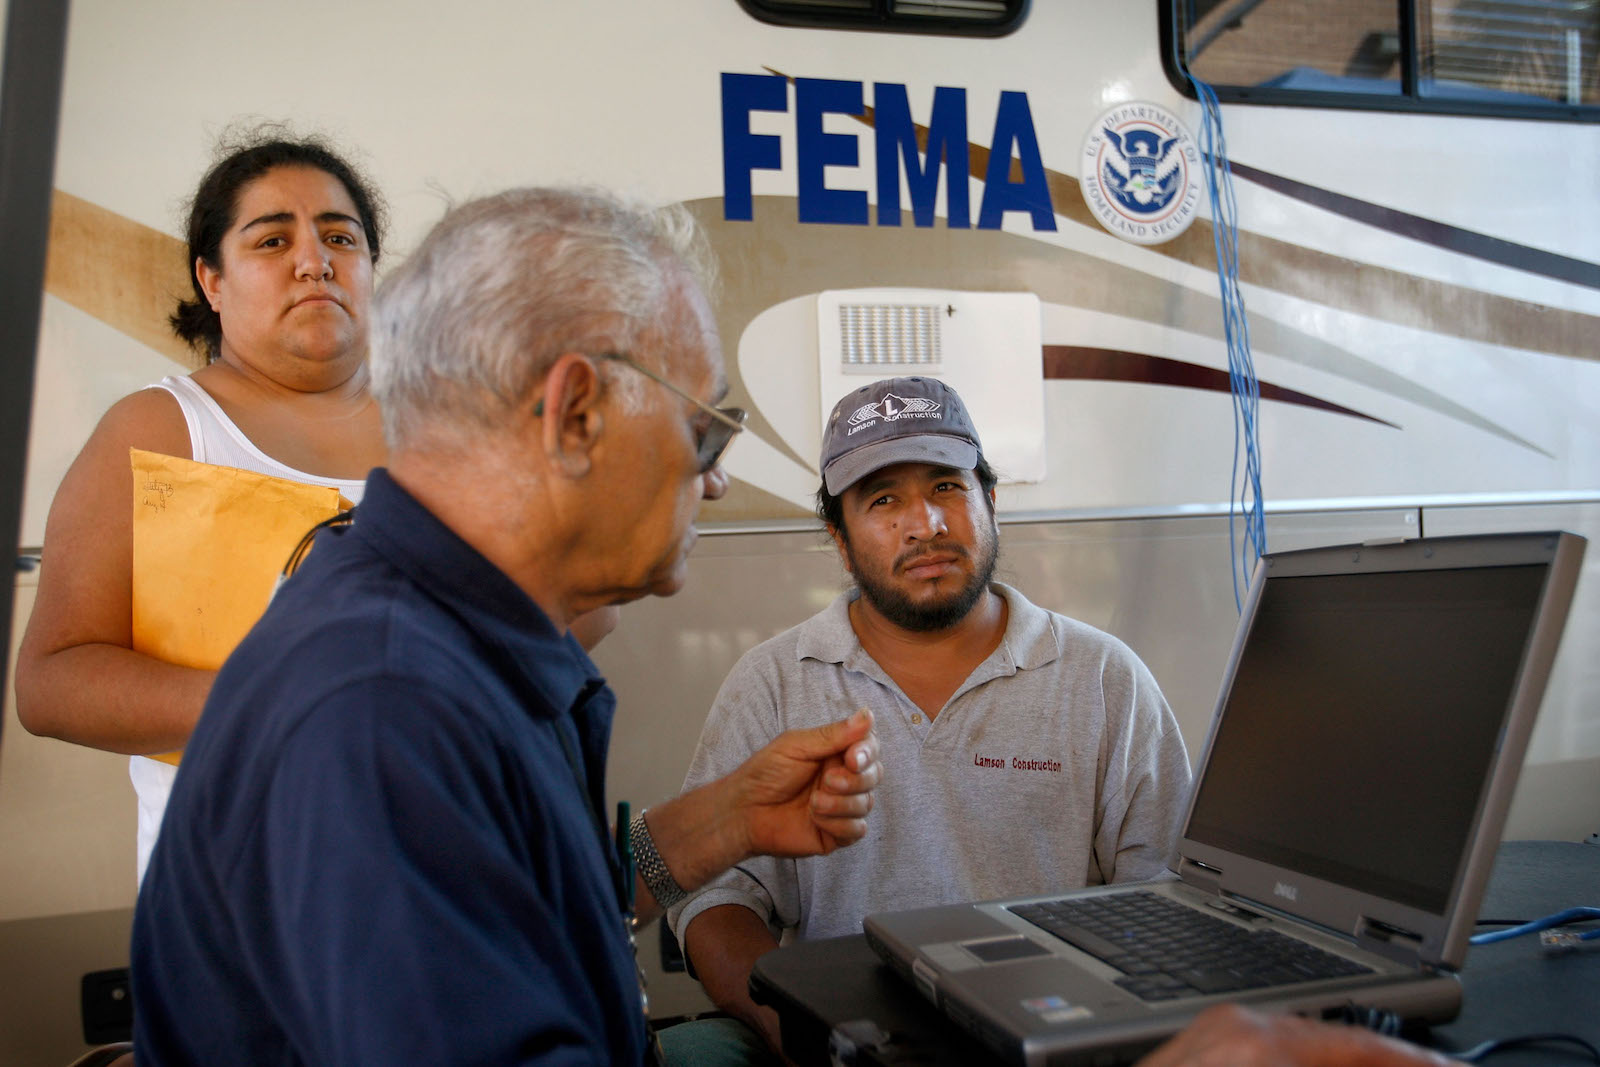 EMA representative Richard Dae (C) registers Victor Leos (R) and his wife Sanjuanita for assistance after their home was damaged during Hurricane Ike September 20, 2008 in Galveston, Texas.